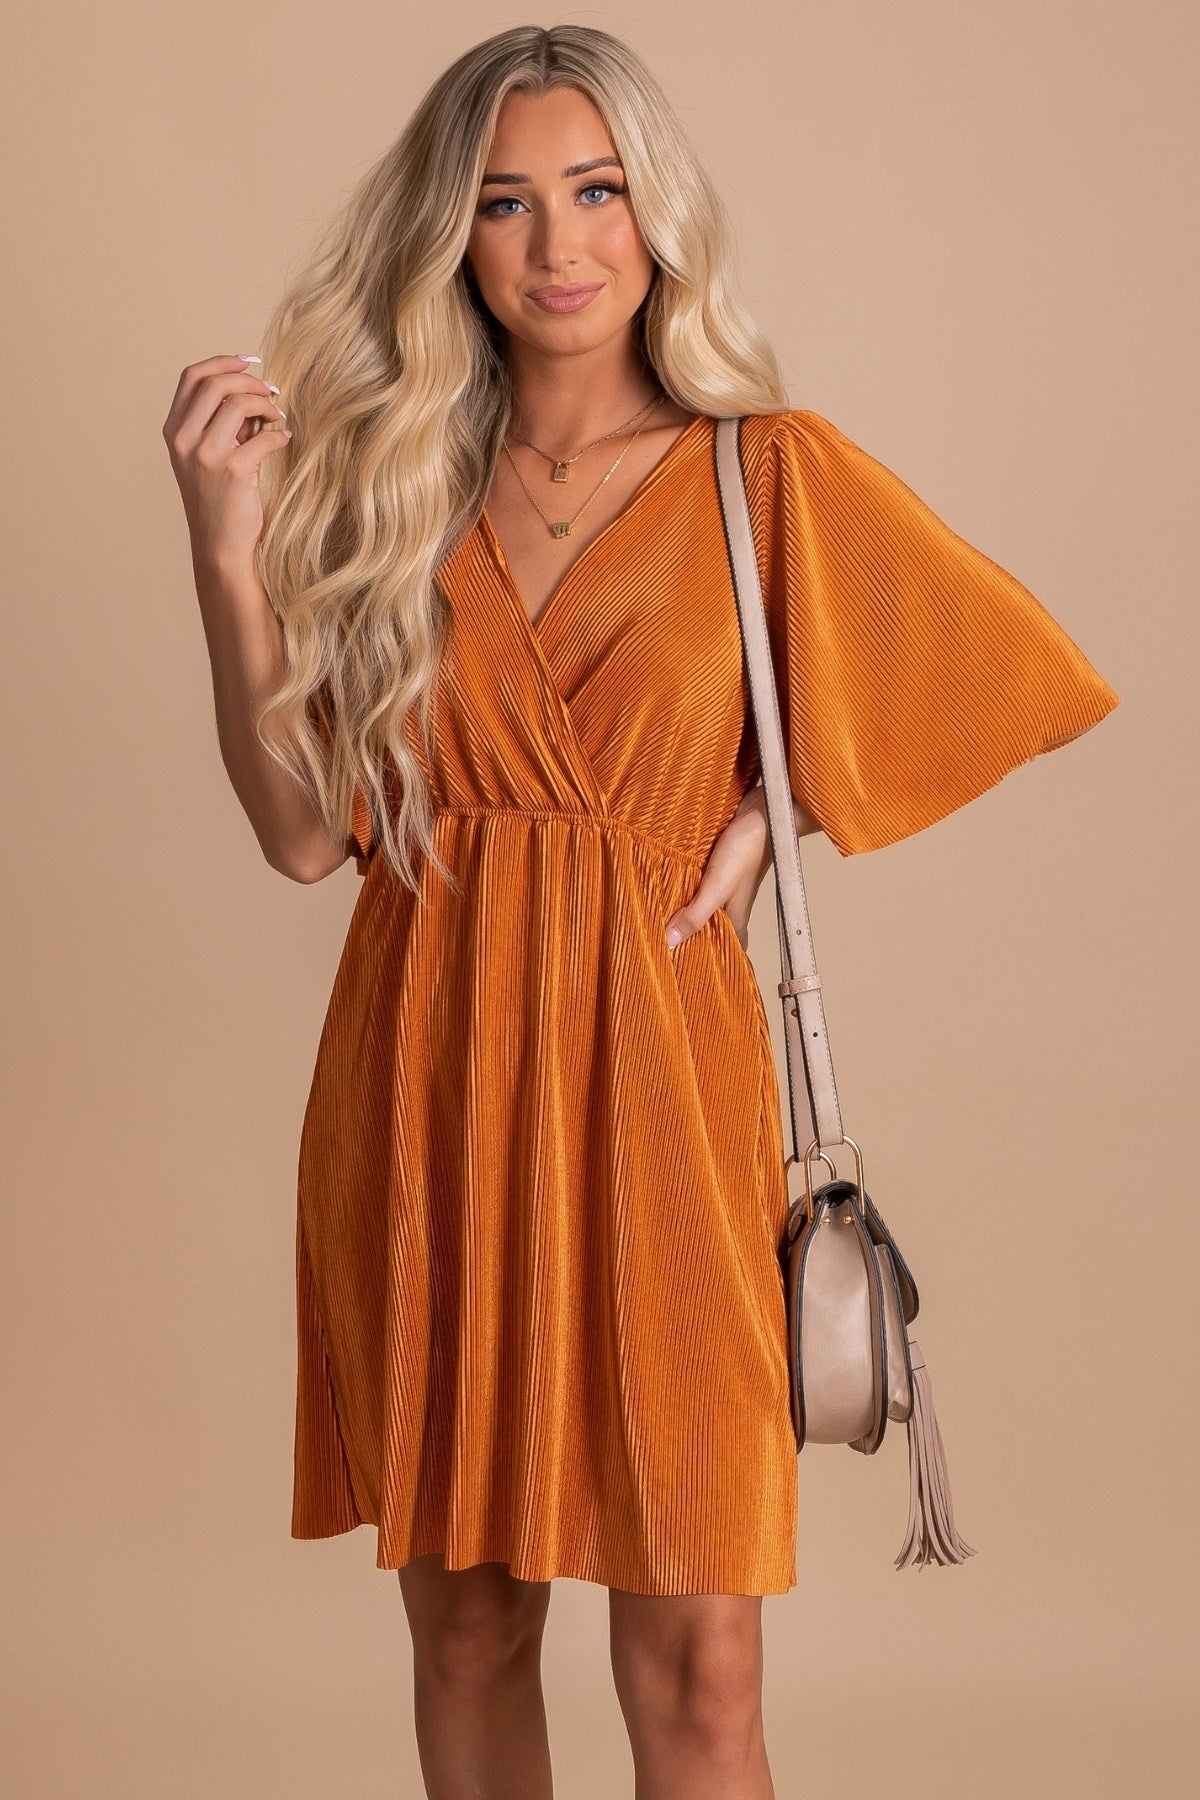 Comfortable Short Dress with Shimmery Fabric in Cognac Orange